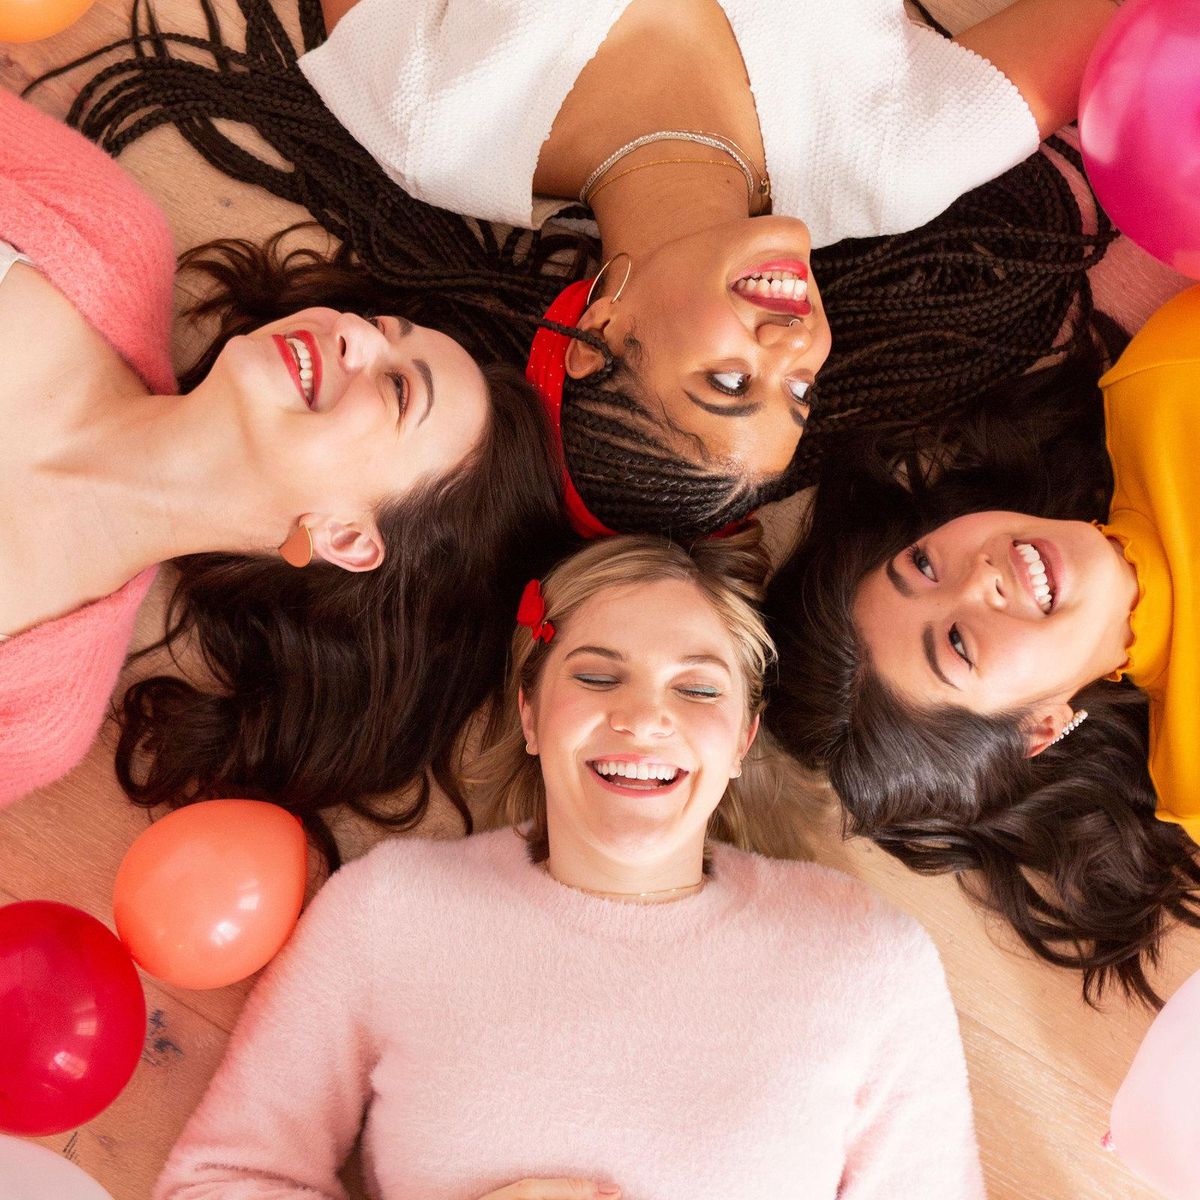 group of girlfriends surrounded by balloons how to celebrate with someone who doesn't want gifts